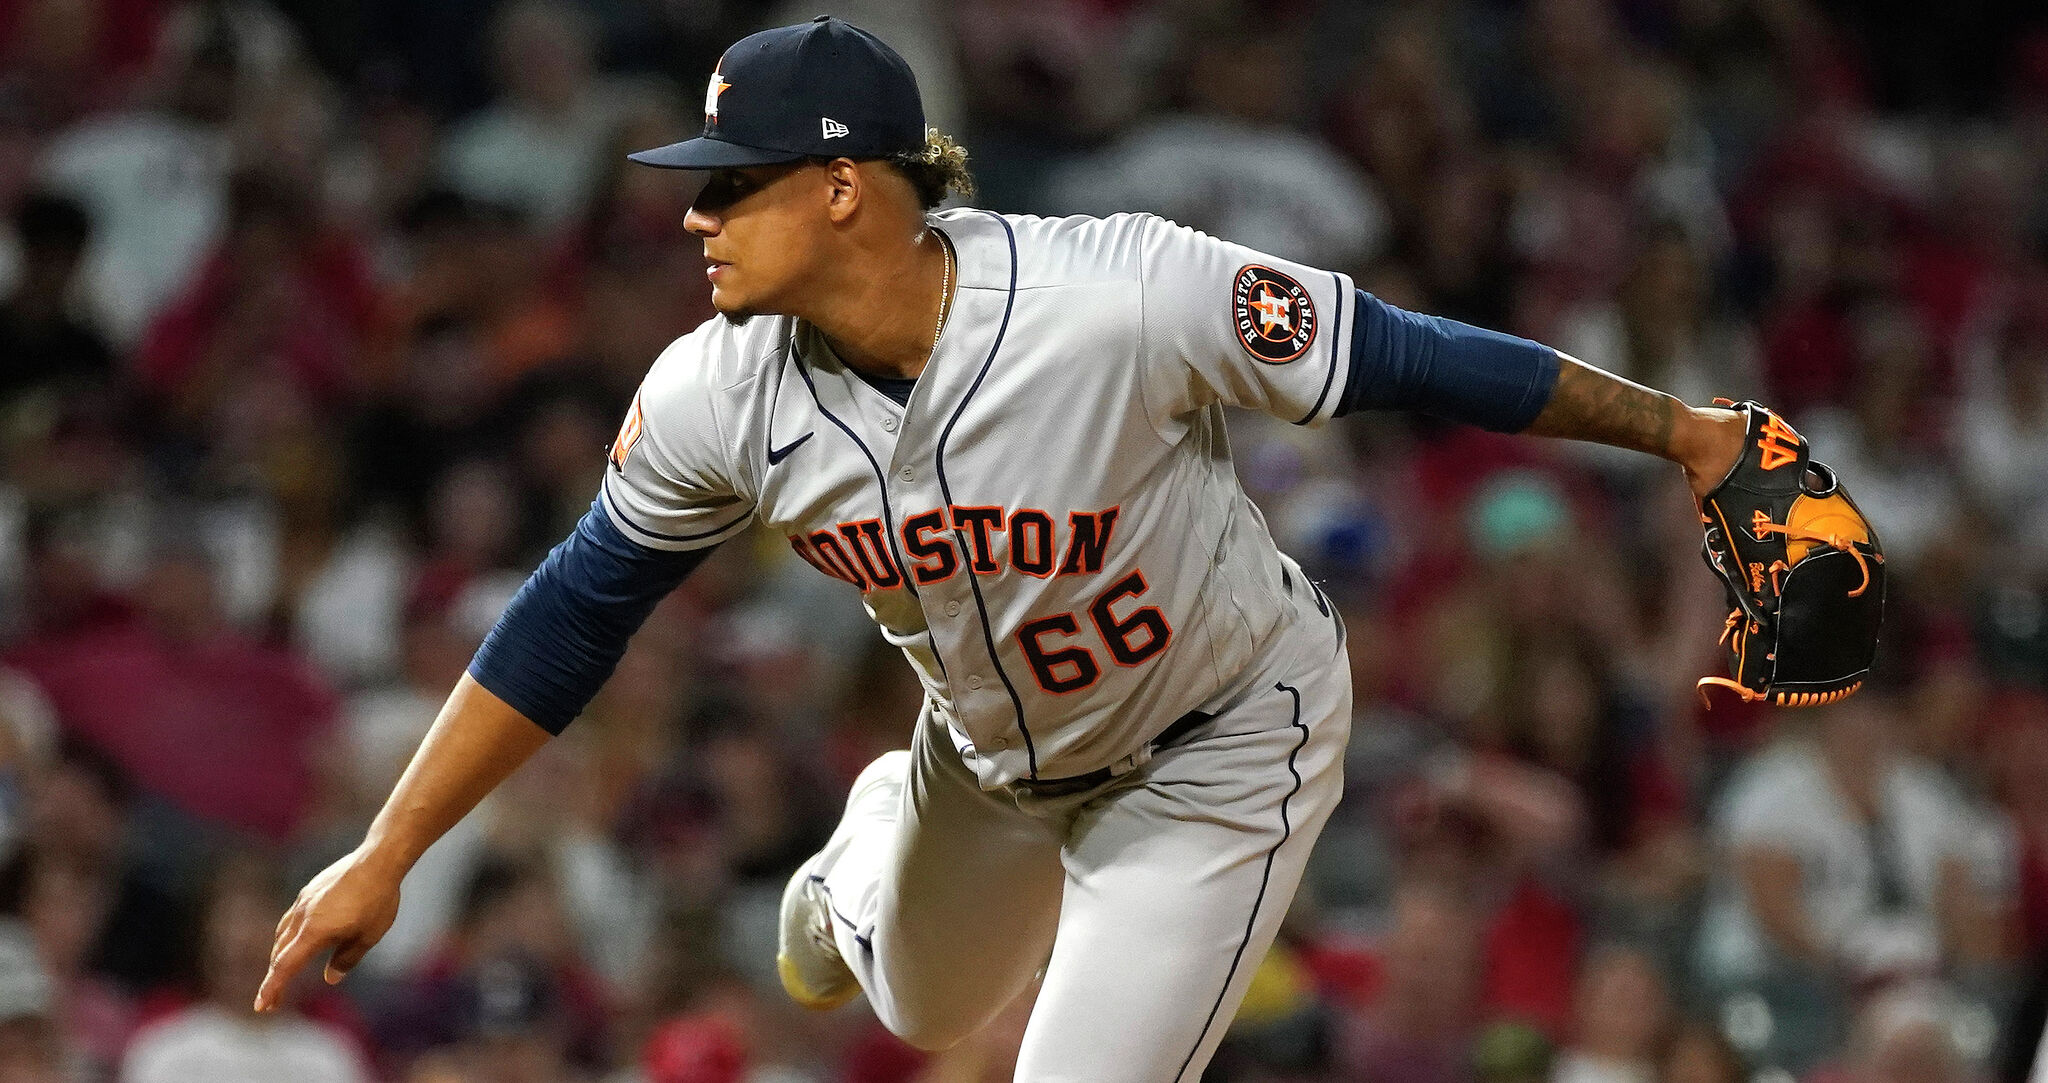 Bryan Abreu's strong start shows he's a weapon for the Astros